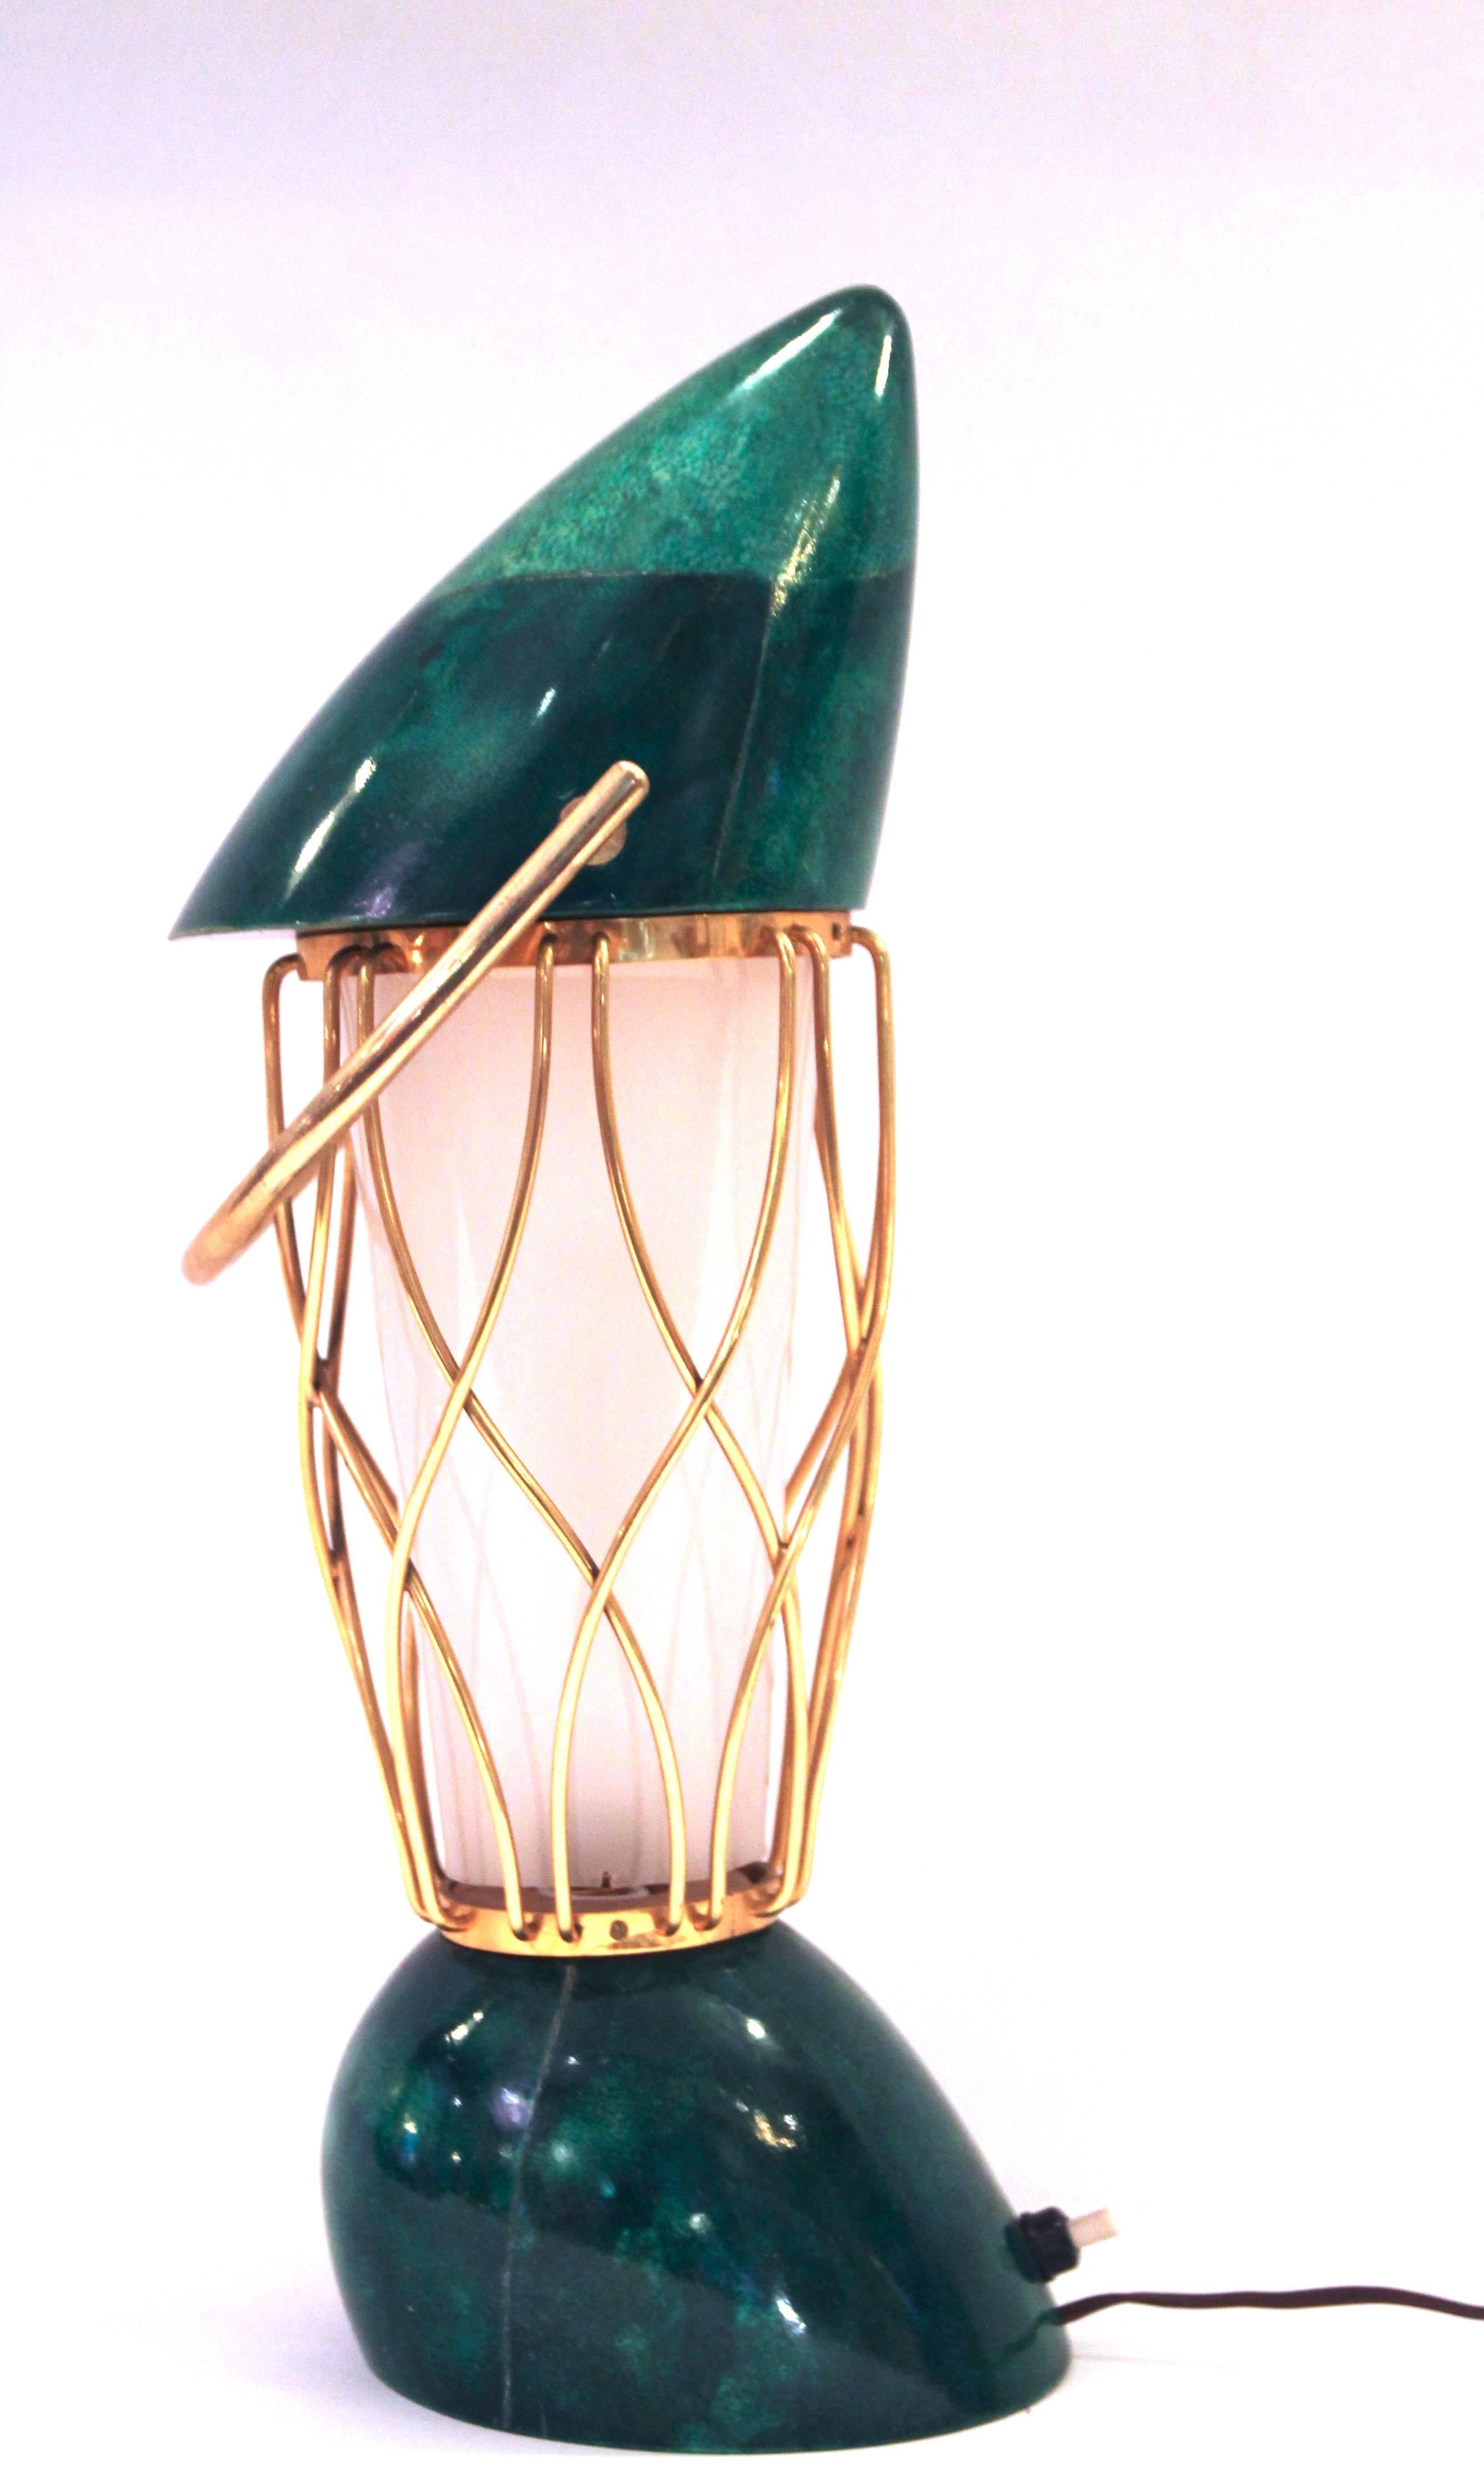 Aldo Tura, table lamp, 
stamped with logo: A.TURA, MILANO,
 green lacquered parchment decorated and style malachite, 
Handle and gilt brass cage and plastic Lampshade,
circa 1960, Italy. 
Height: 40 cm, diameter 15 cm.